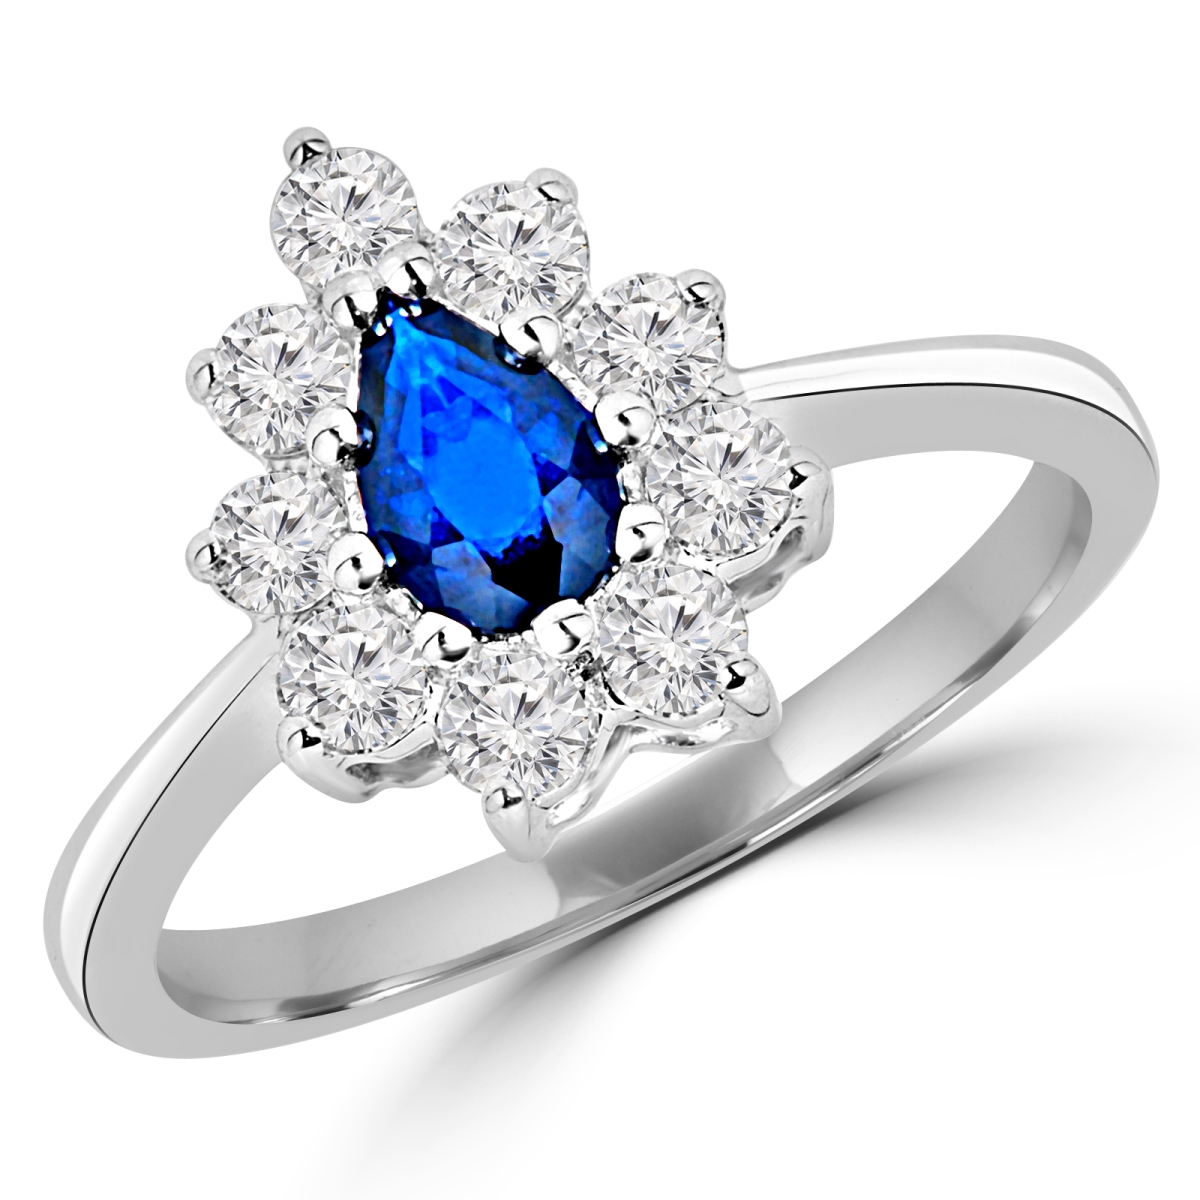 Picture of Majesty Diamonds MD180236-P 1 CTW Pear Blue Sapphire Halo Cocktail Ring in 14K White Gold